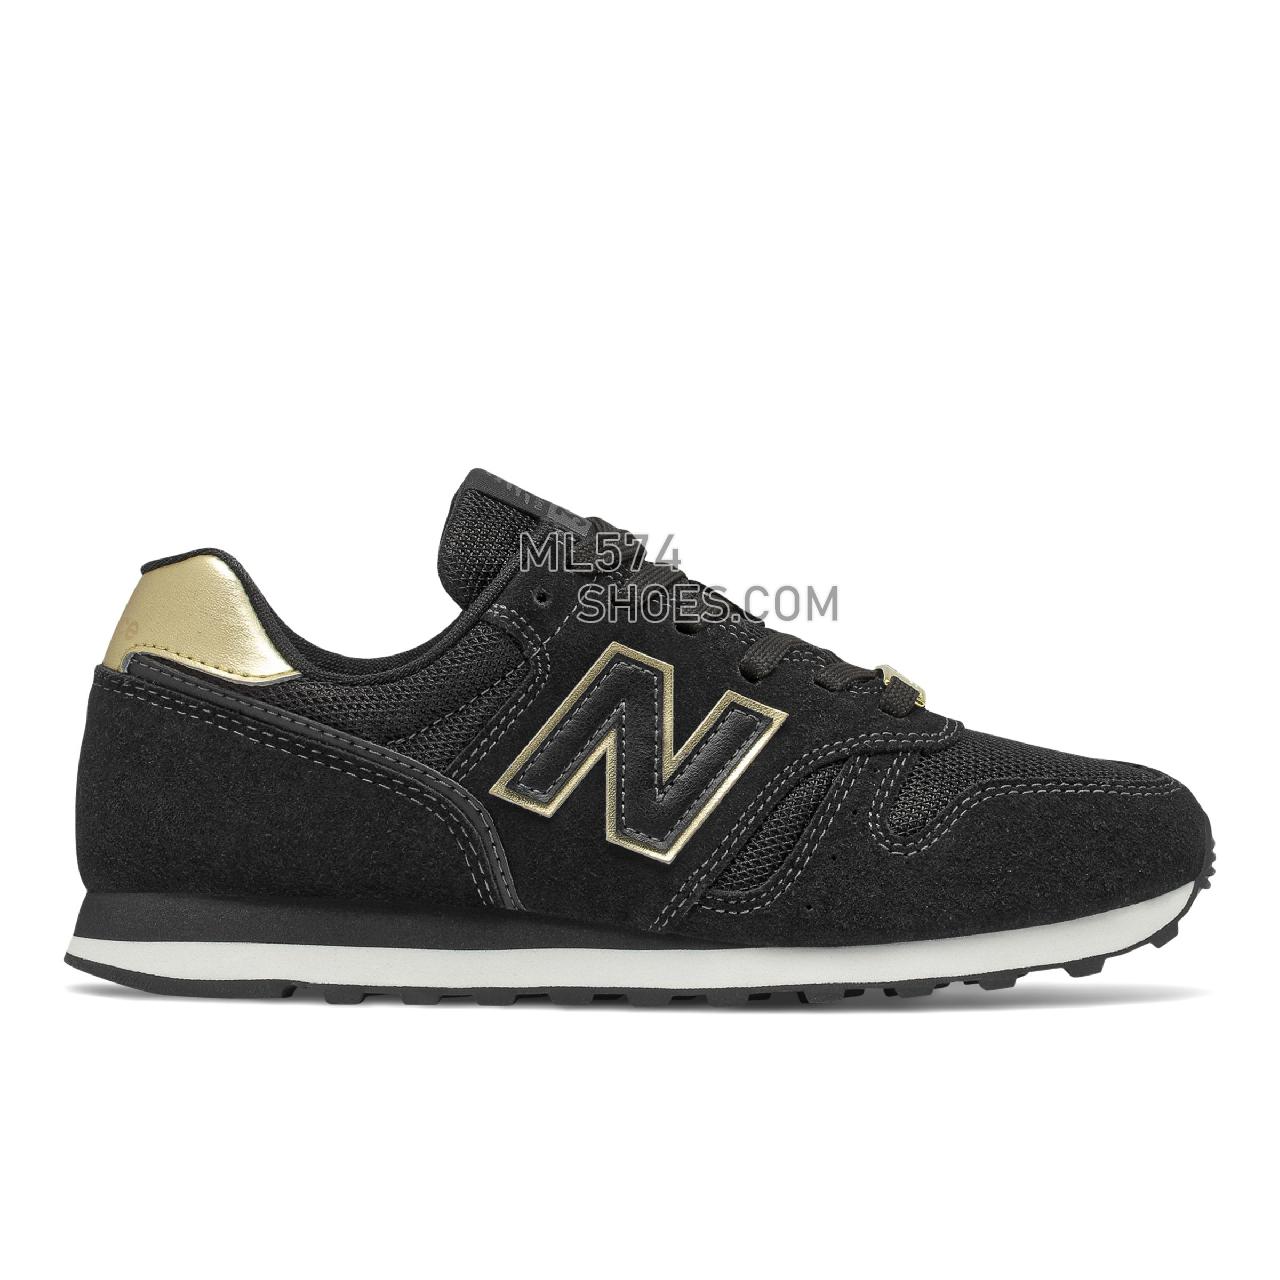 New Balance 373V2 - Women's Classic Sneakers - Black with Gold Metallic - WL373ME2